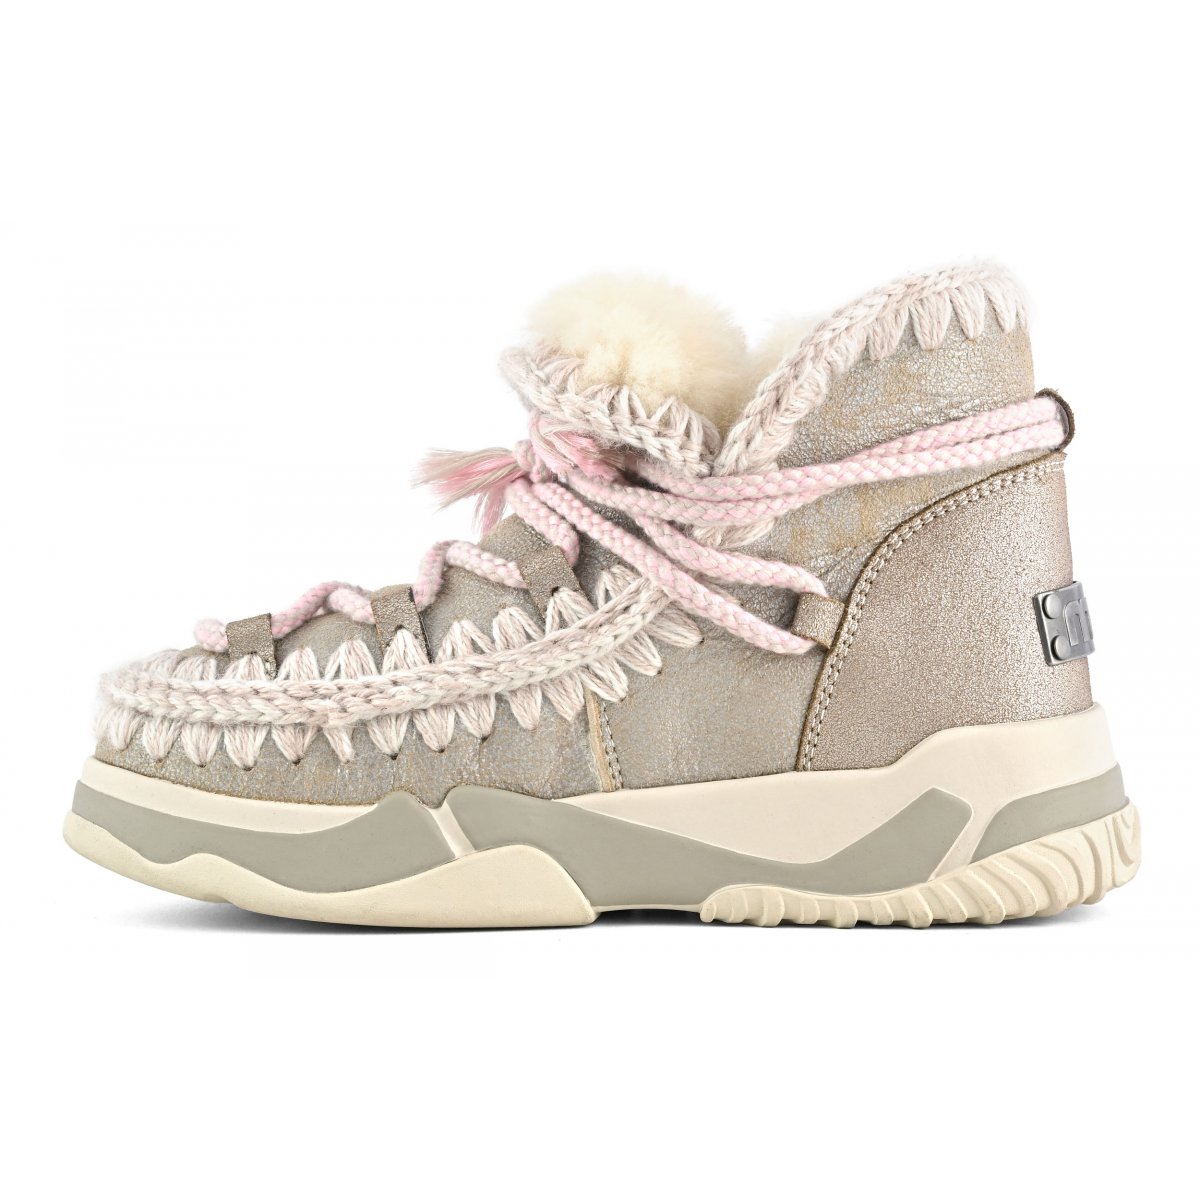 Scoubidou lace trainer STME img 5